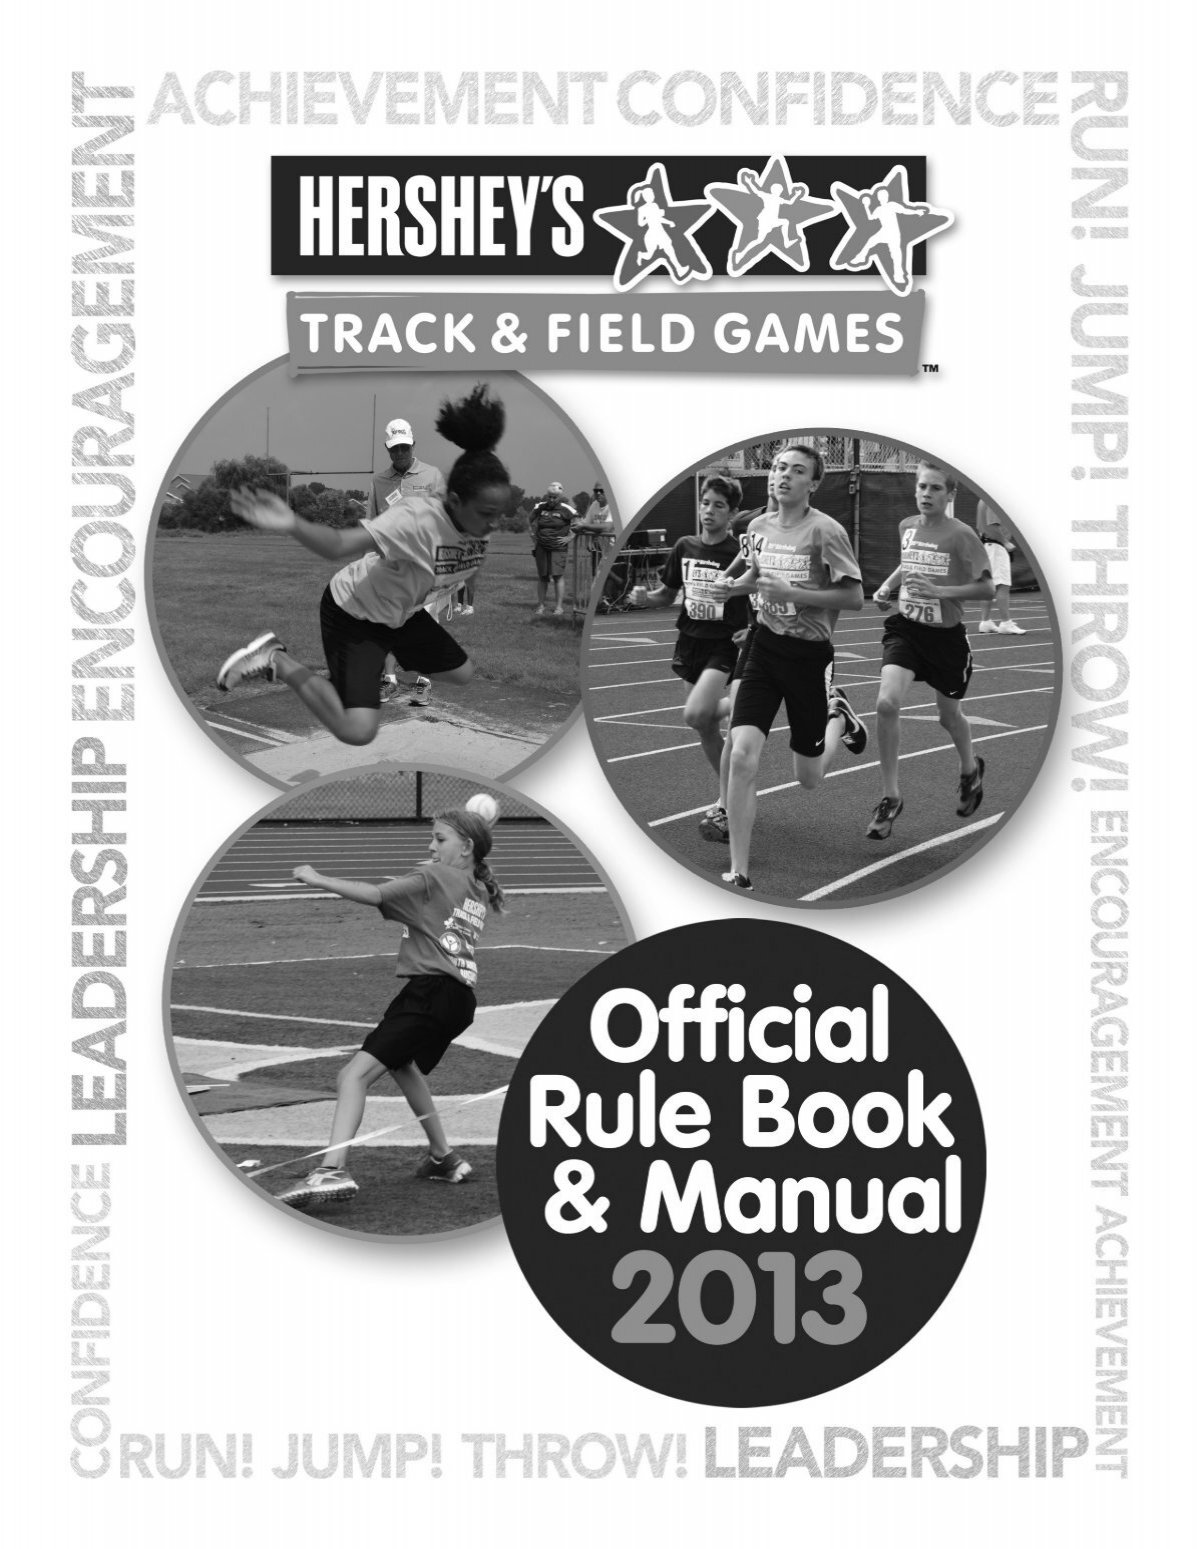 Official Rule Book - HERSHEY'S Track and Field